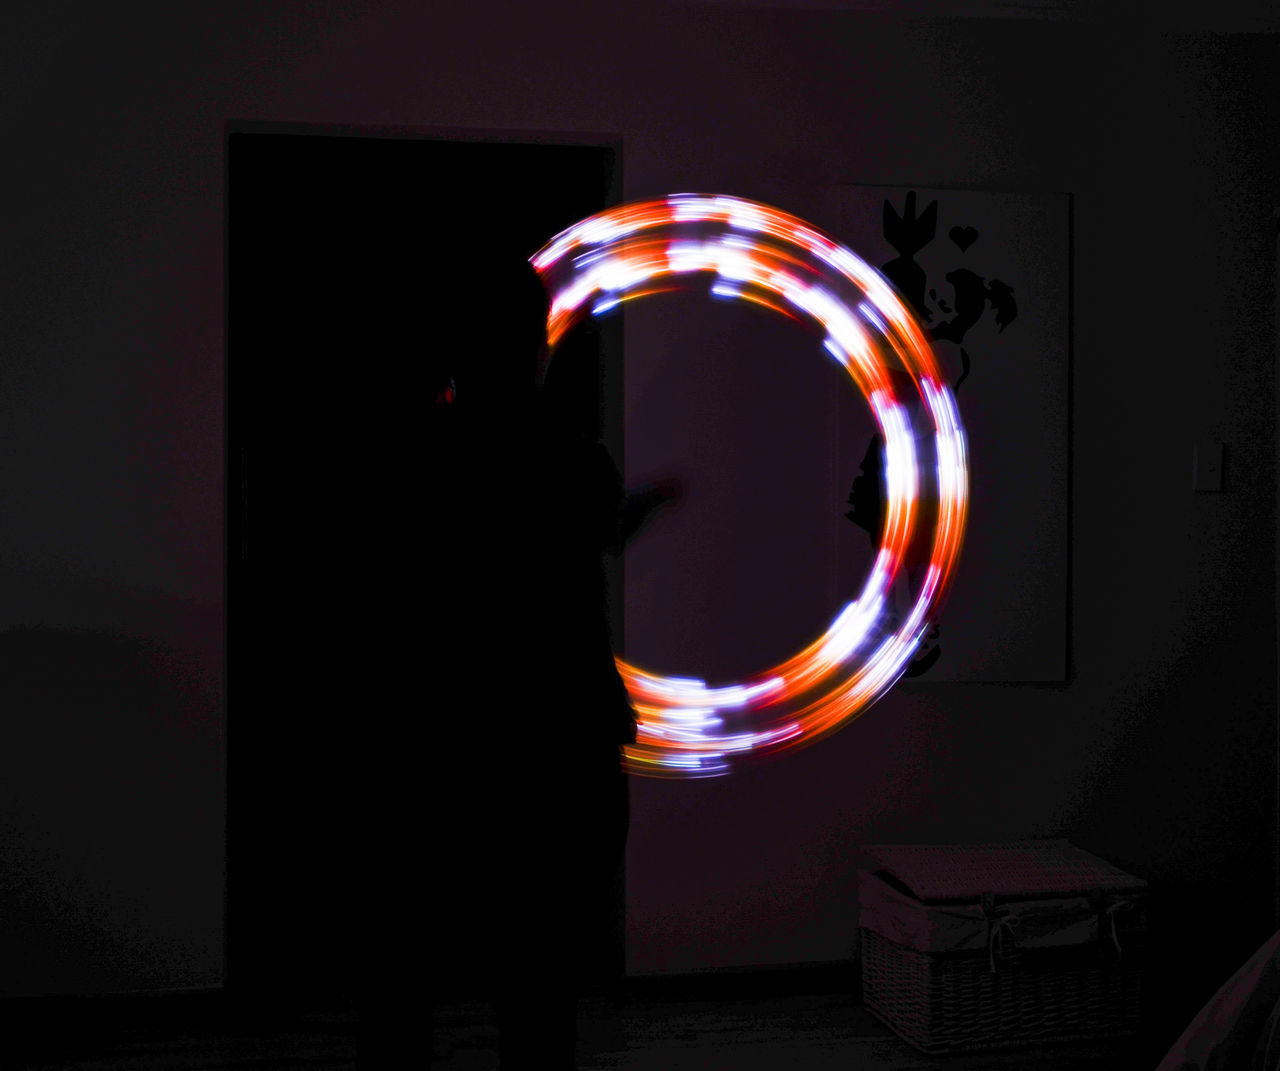 light, illuminated, darkness, circle, night, number, lighting, geometric shape, shape, no people, glowing, arts culture and entertainment, font, indoors, red, neon, long exposure, black